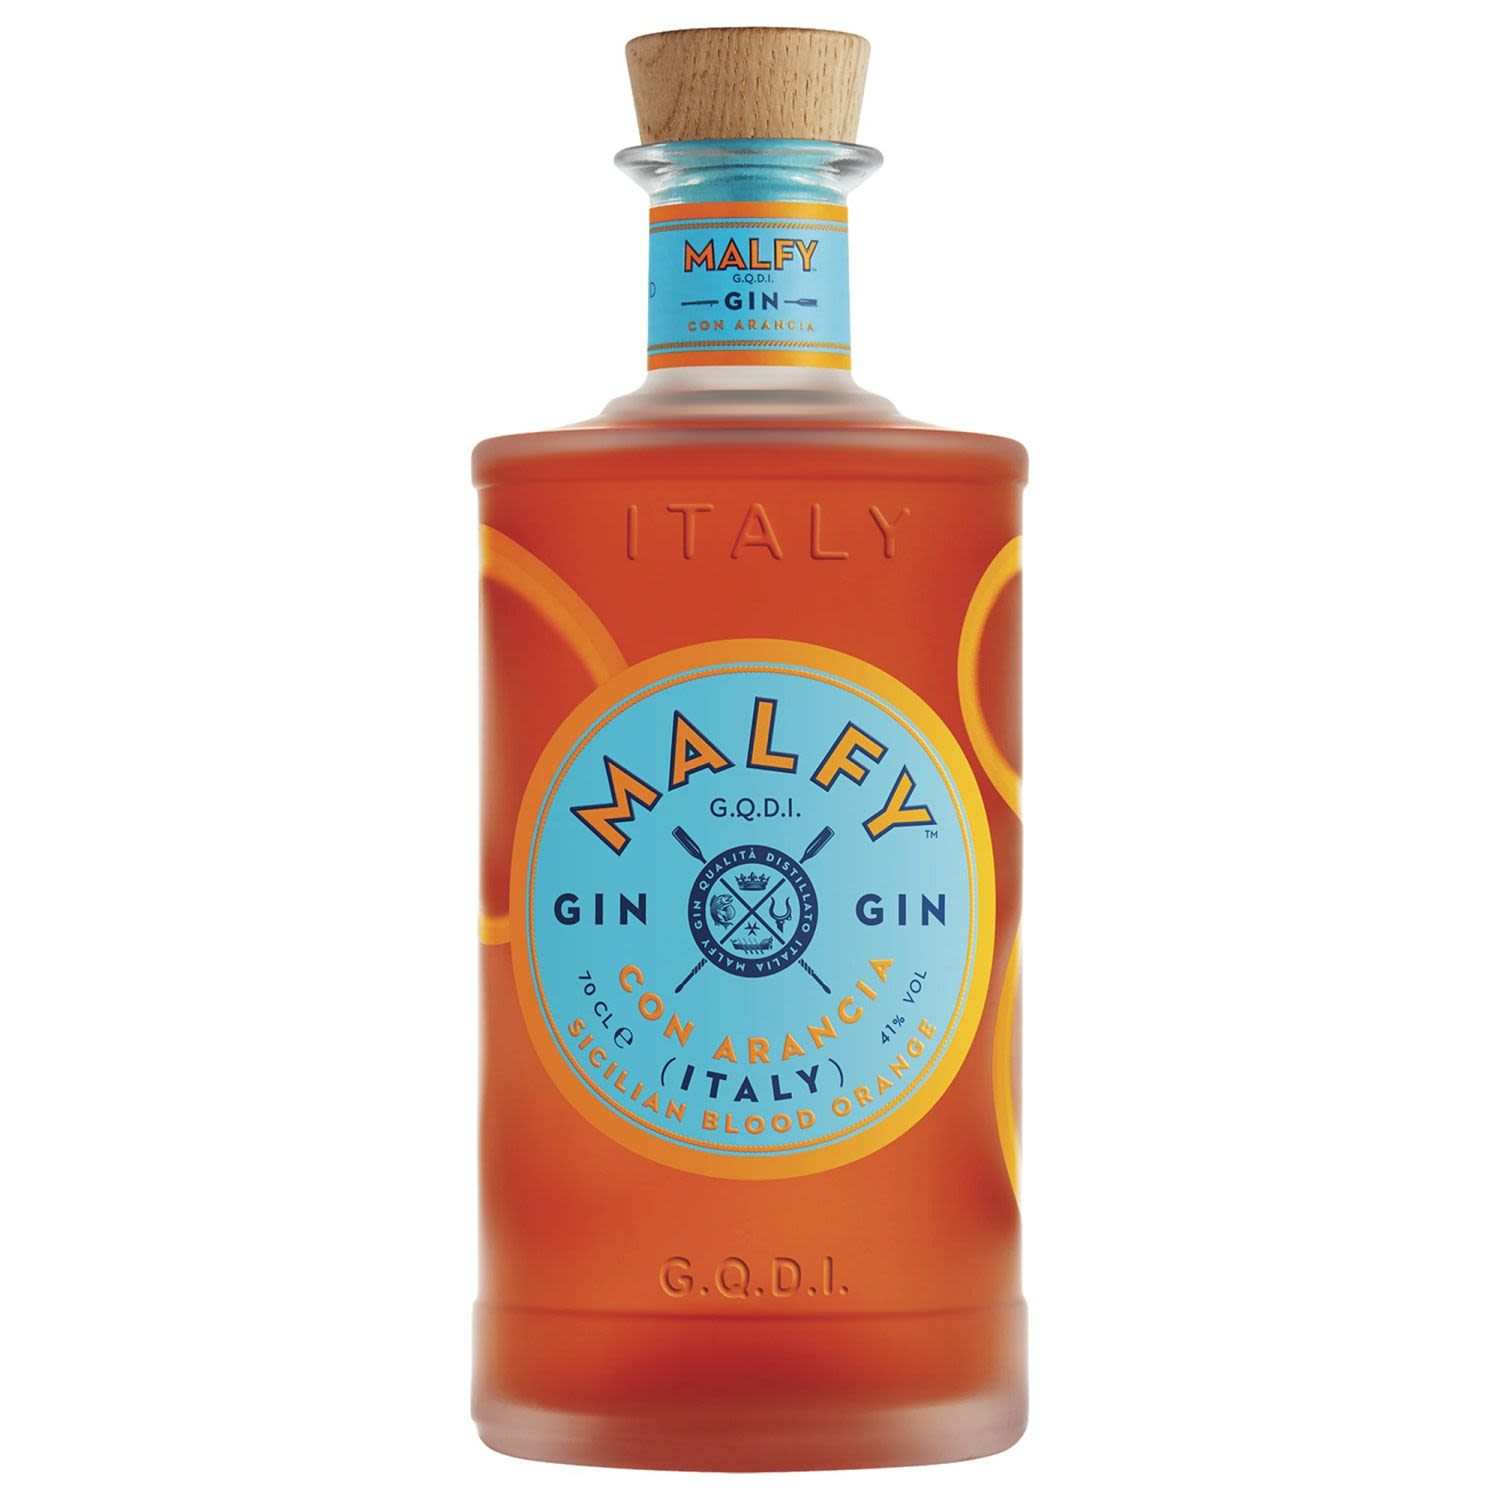 Juniper, Sicilian Blood Oranges and 6 botanicals.  MALFY® Con Arancia’s key botanical additions are Blood Orange peels sourced from Sicily. Blood Oranges are a prized variety in Sicily – and harvested in November – their rich red color develops from the cool Mediterranean nights. The Blood Orange peels are steeped in alcohol and pressed in a basket press. The infusion is then blended with juniper and other botanicals before being distilled in a stainless steel vacuum still.<br /> <br />Alcohol Volume: 41.00%<br /><br />Pack Format: Bottle<br /><br />Standard Drinks: 22.6<br /><br />Pack Type: Bottle<br /><br />Country of Origin: Italy<br />